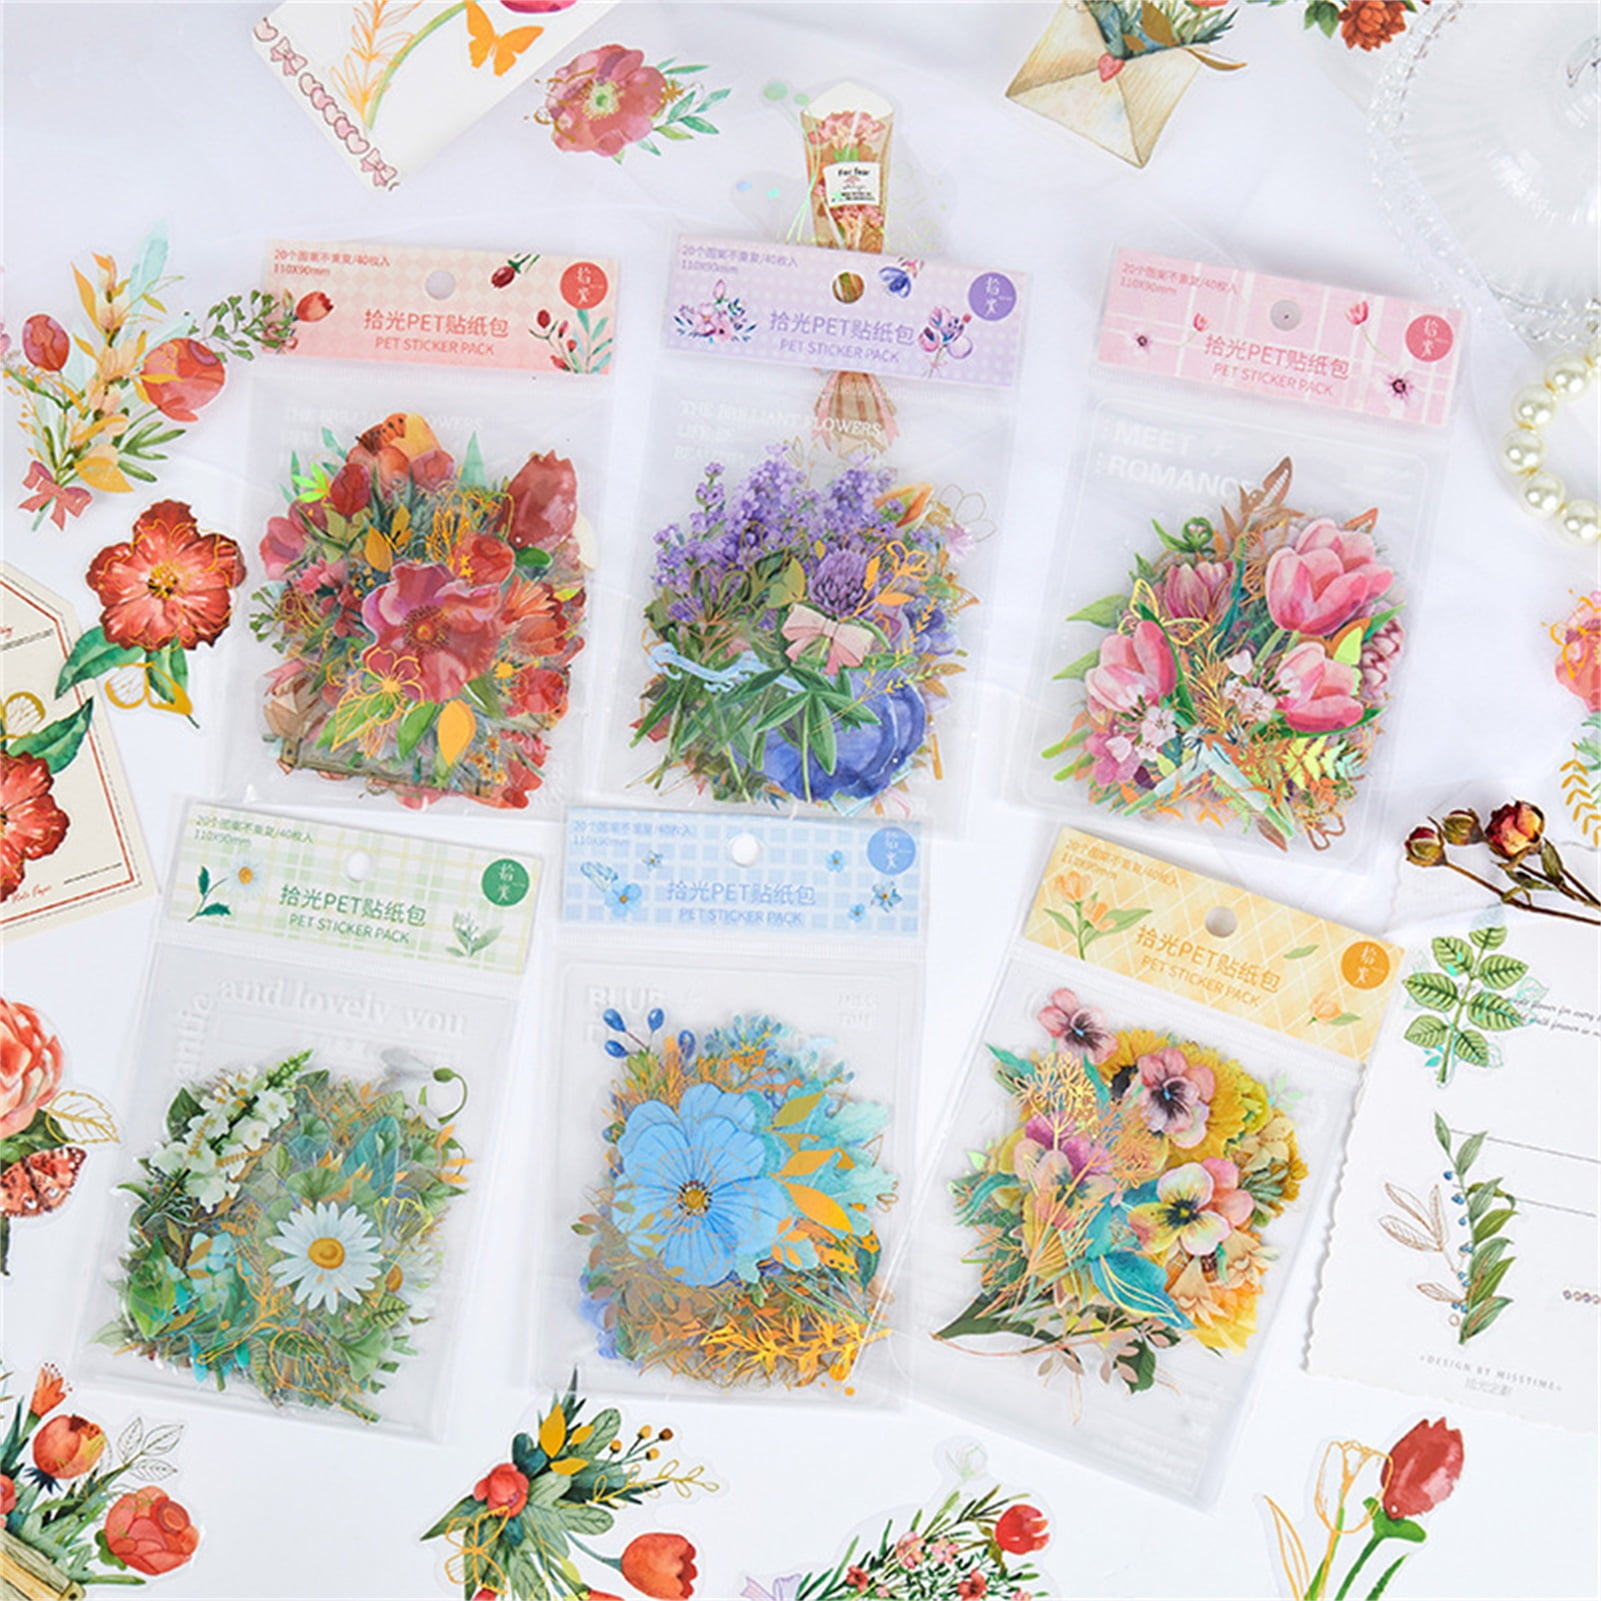 445 PCS Vintage Scrapbook Paper Journaling Scrapbooking Supplies Kit  Aesthetic Decorative Craft Paper include 40 Sheet Flowers Stickers for  Planner